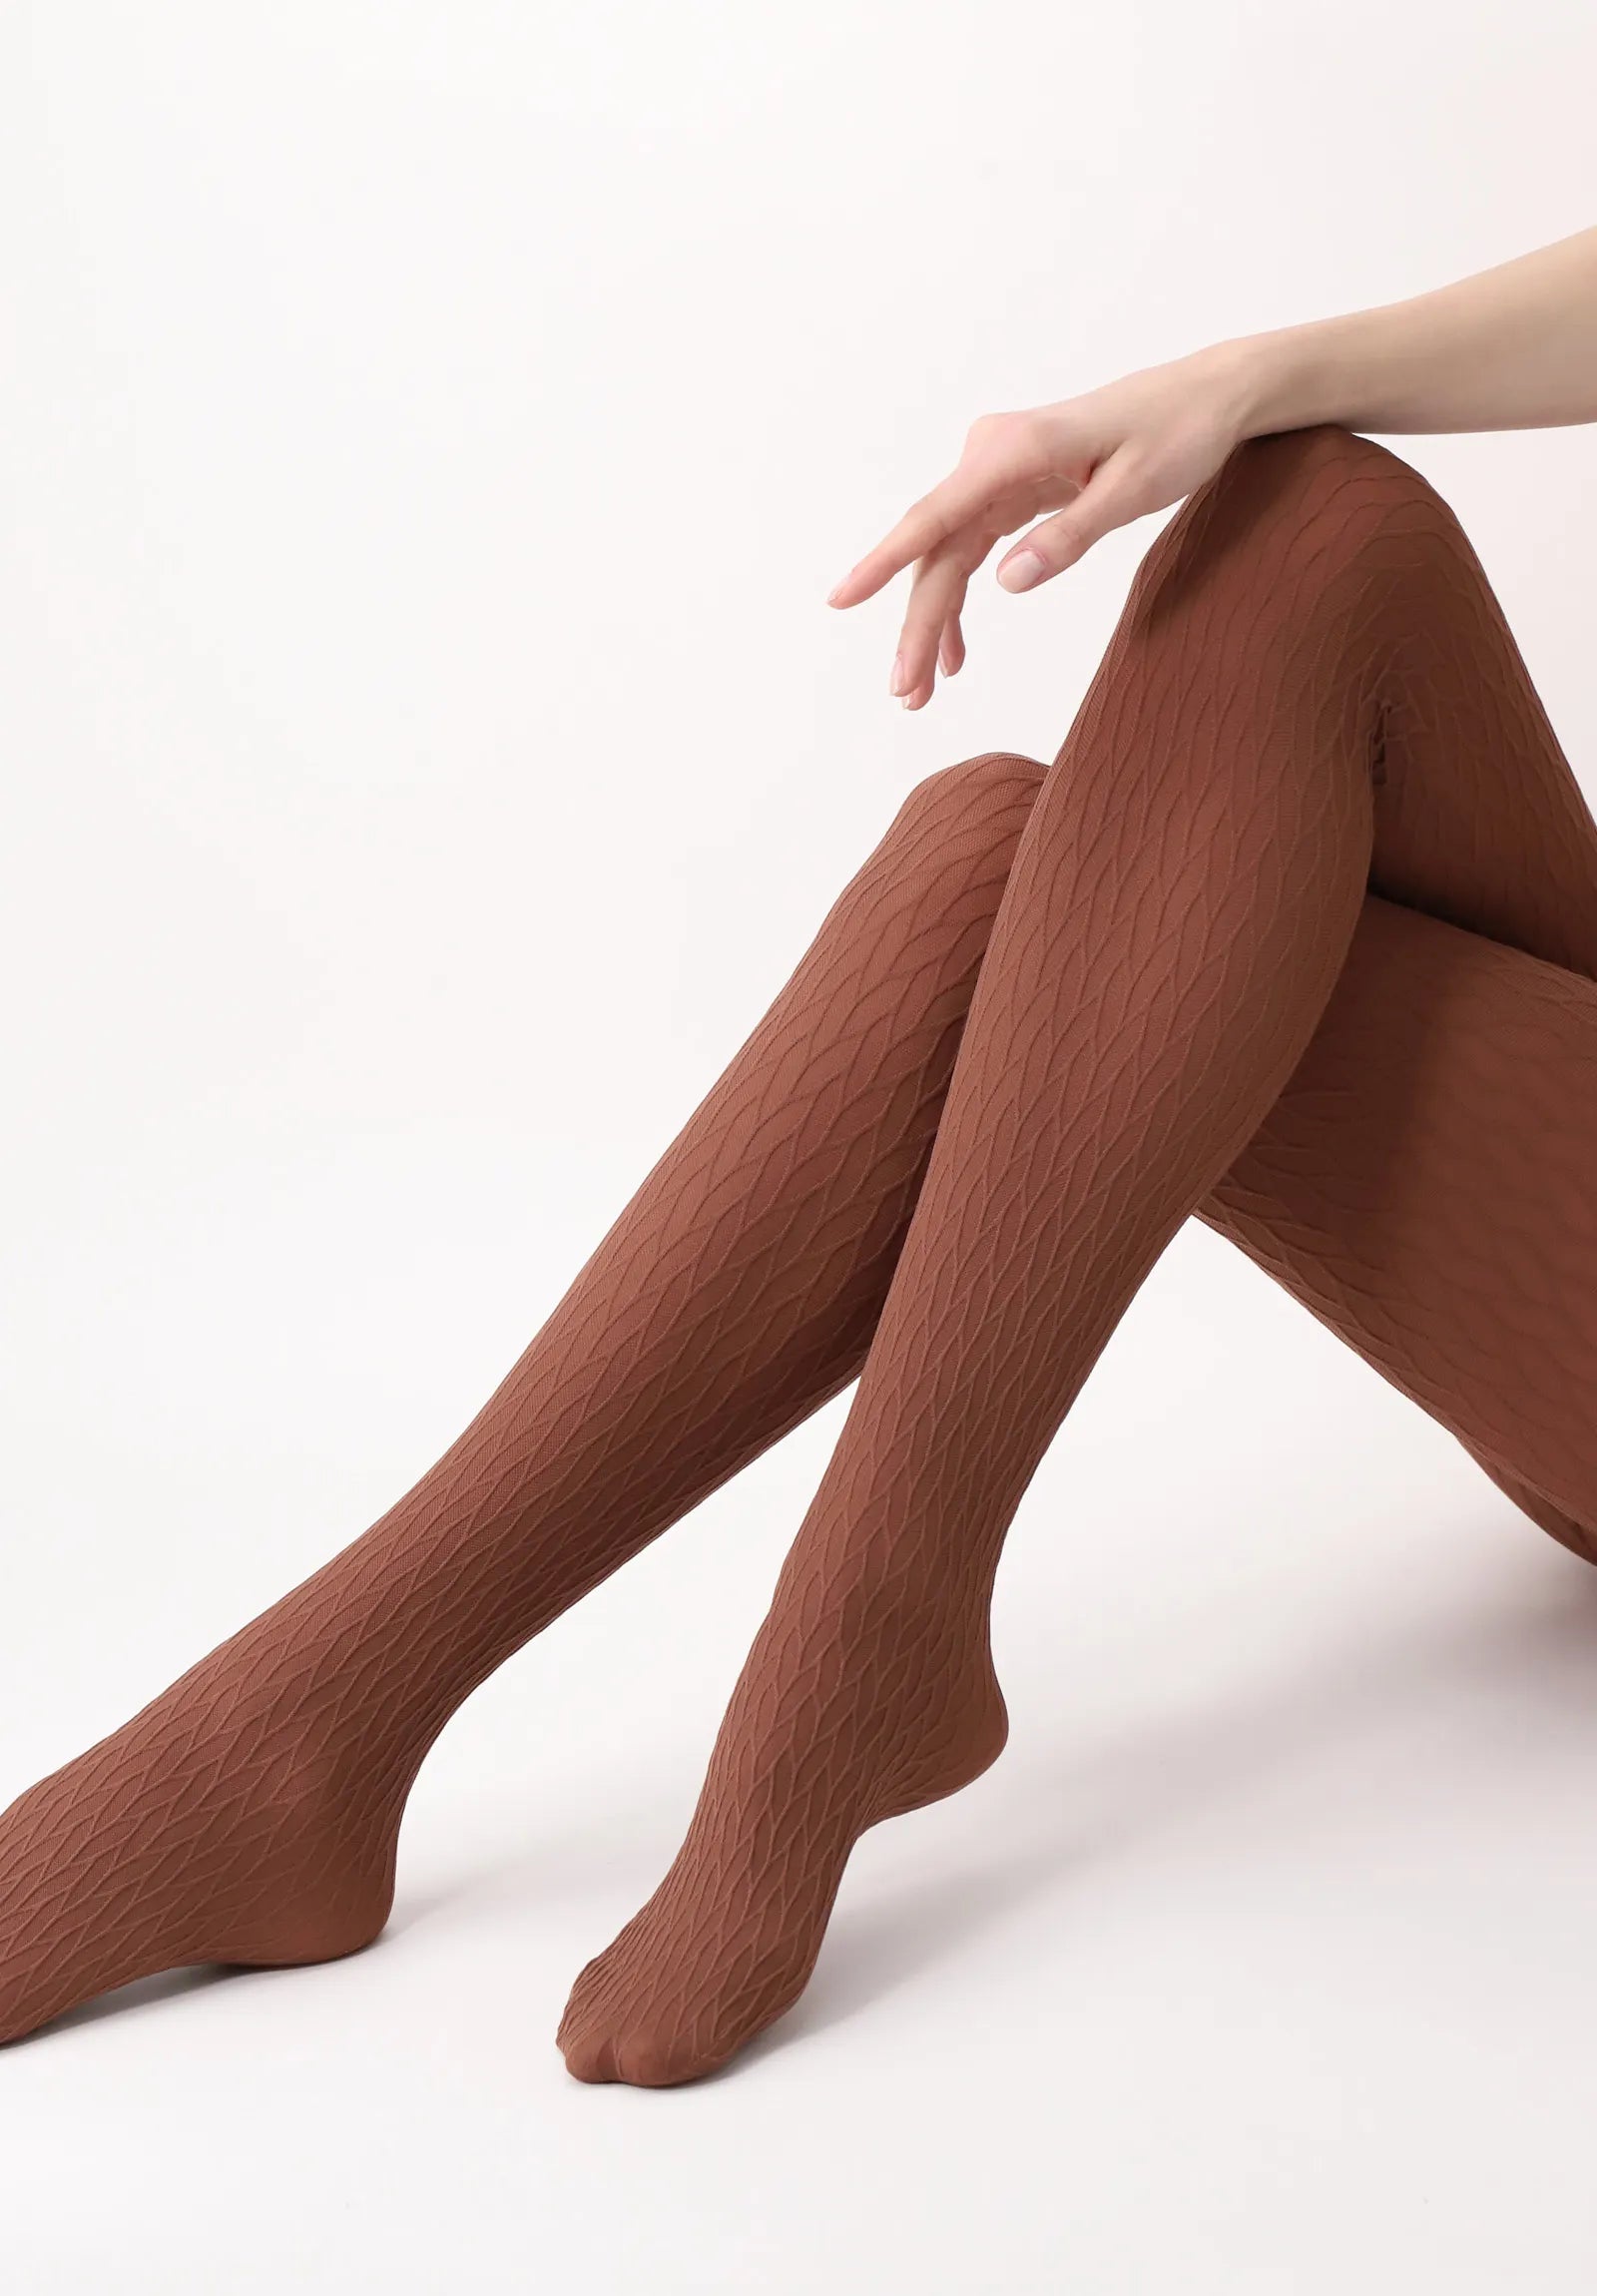 Oroblù Winding Tights - Light brown opaque fashion tights with an all over subtle braided cable knit style jacquard pattern